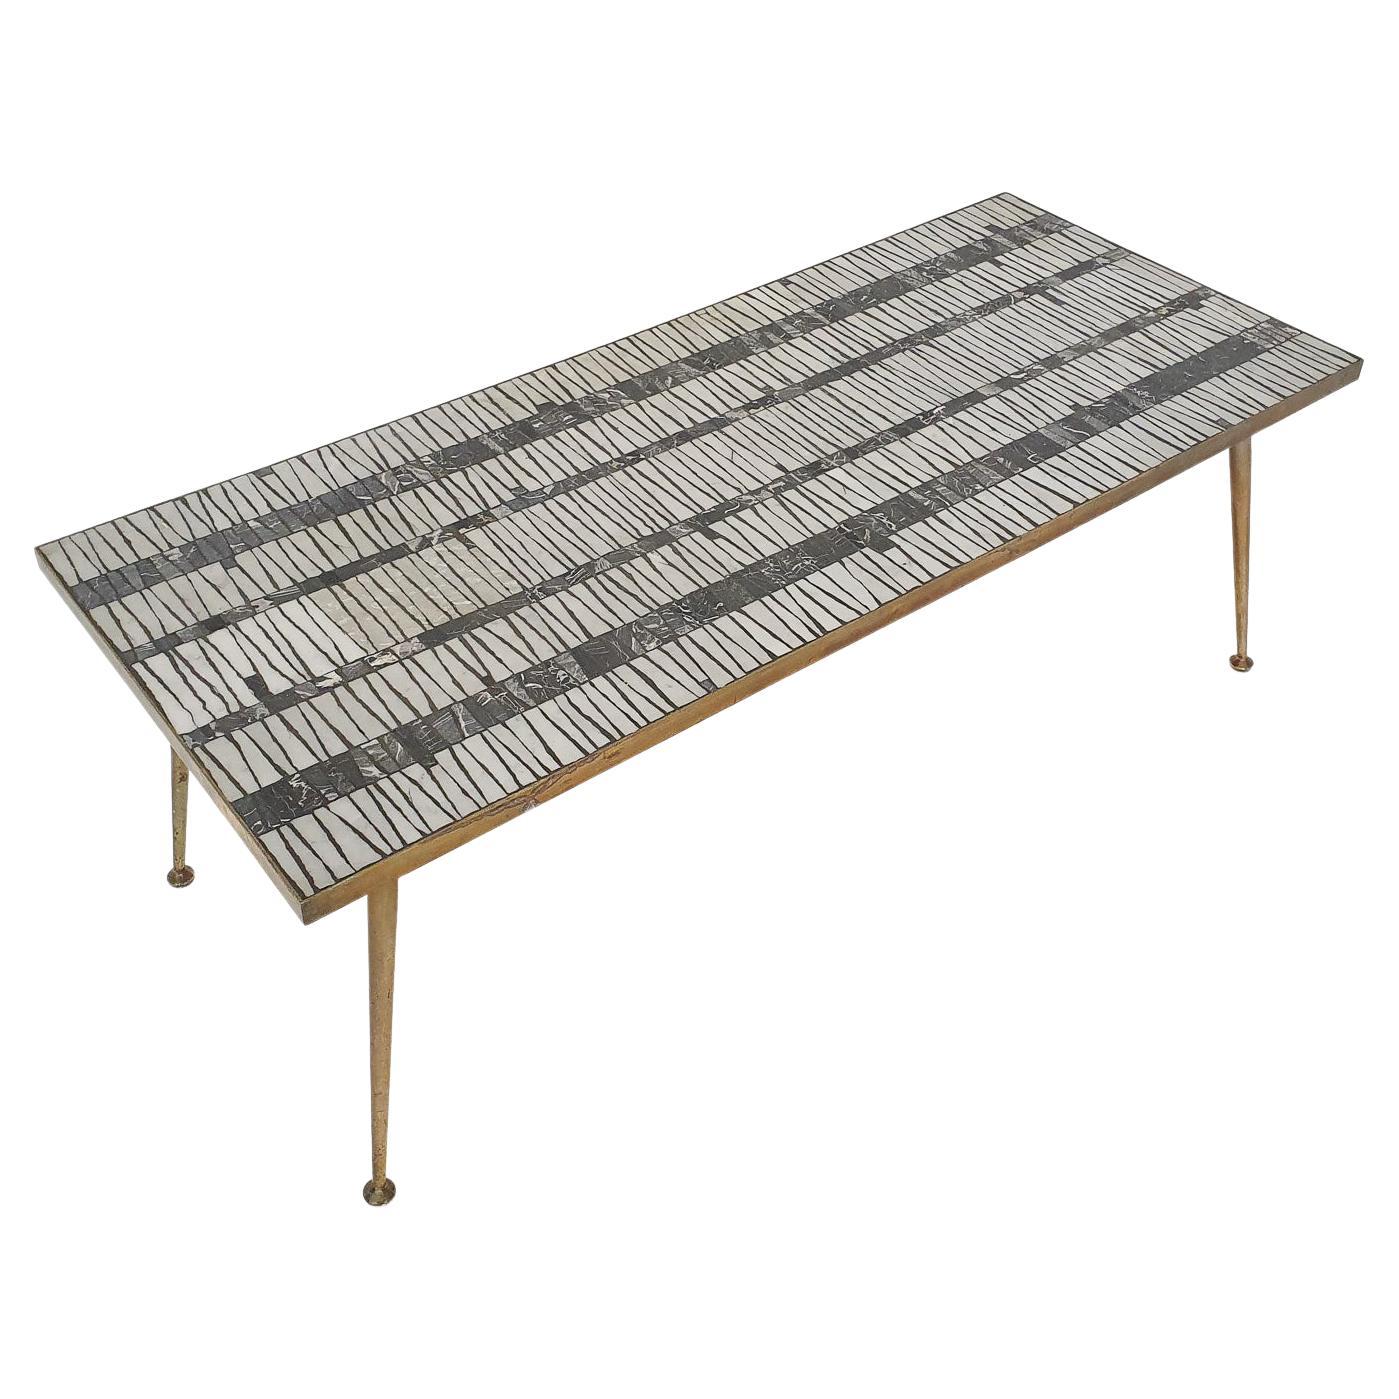 Berthold Muller Mosaic Cofffe Table with Brass Legs, Germany 1950's